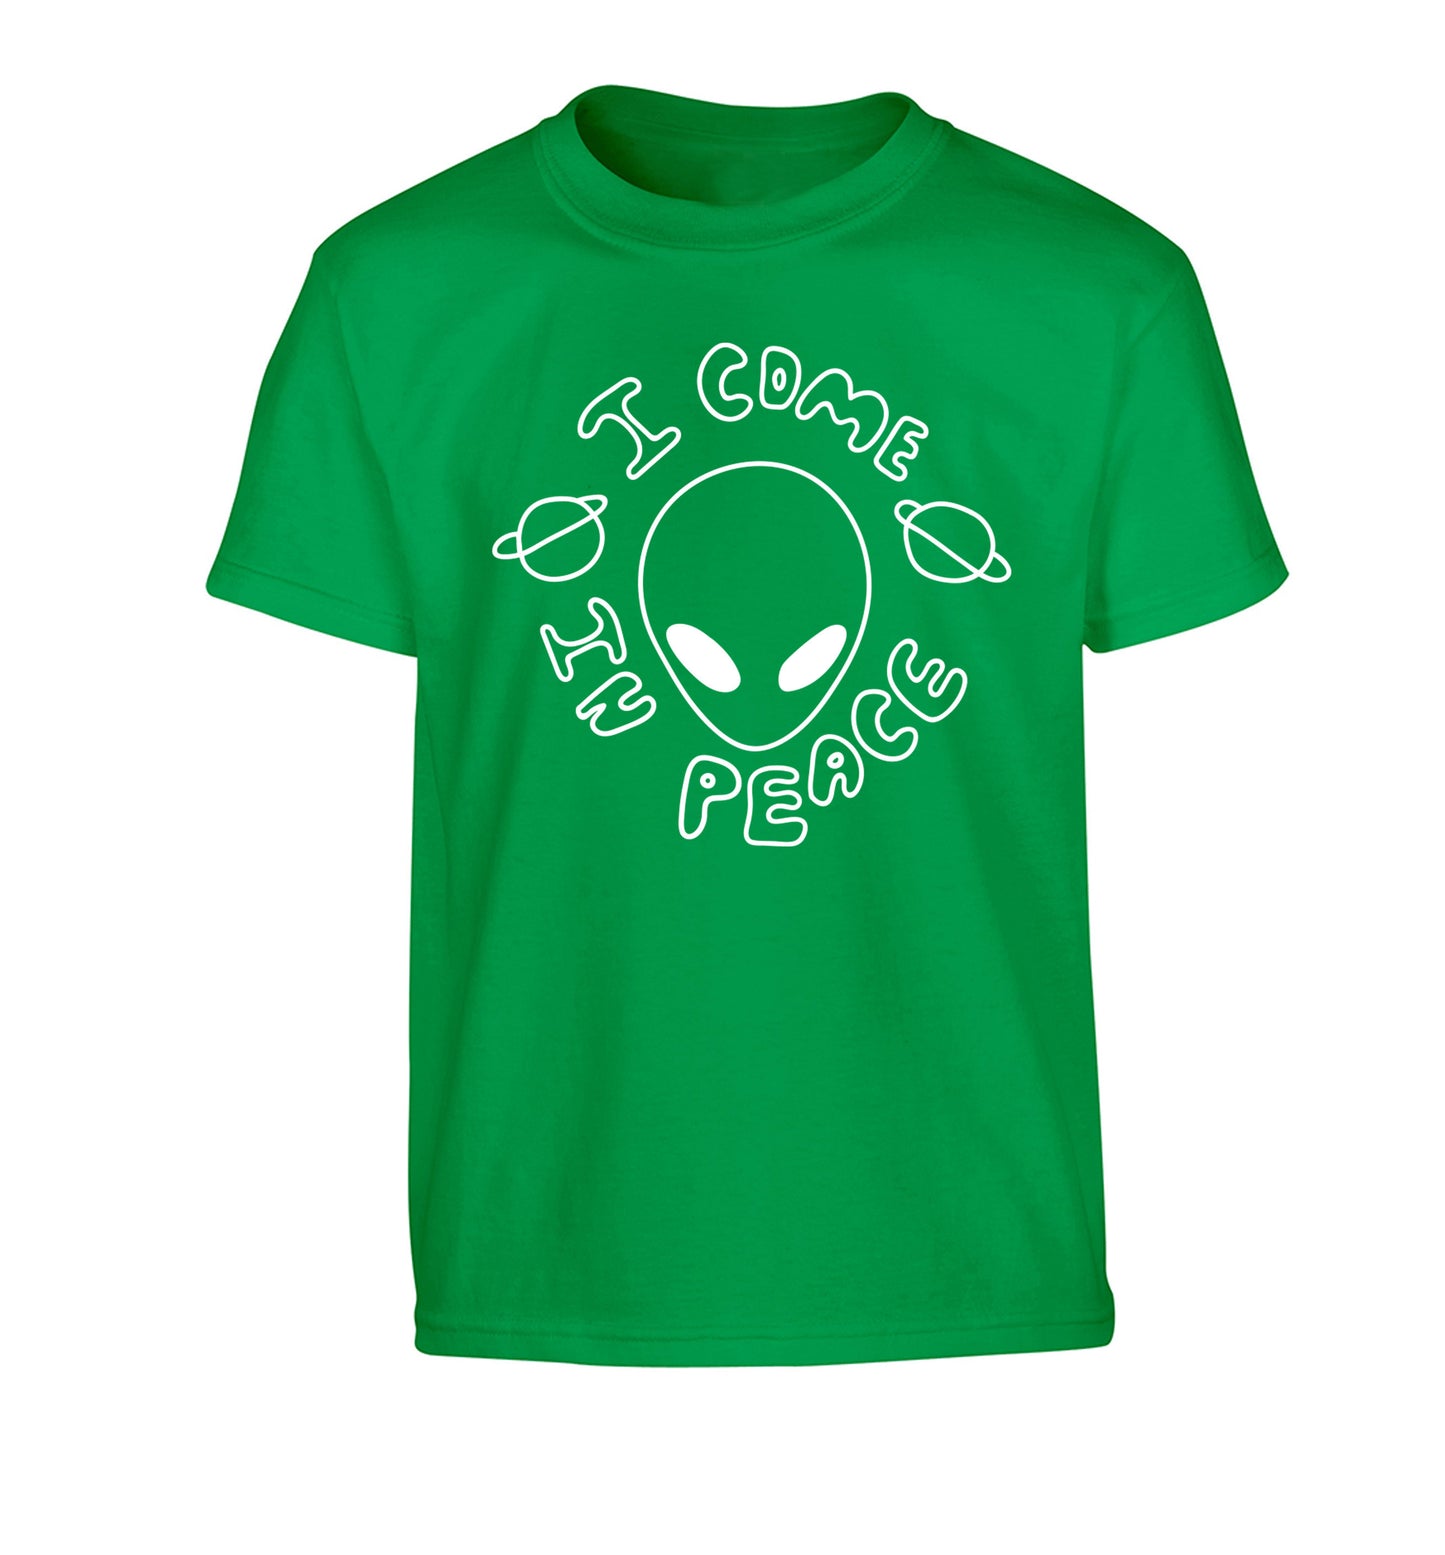 I come in peace Children's green Tshirt 12-14 Years